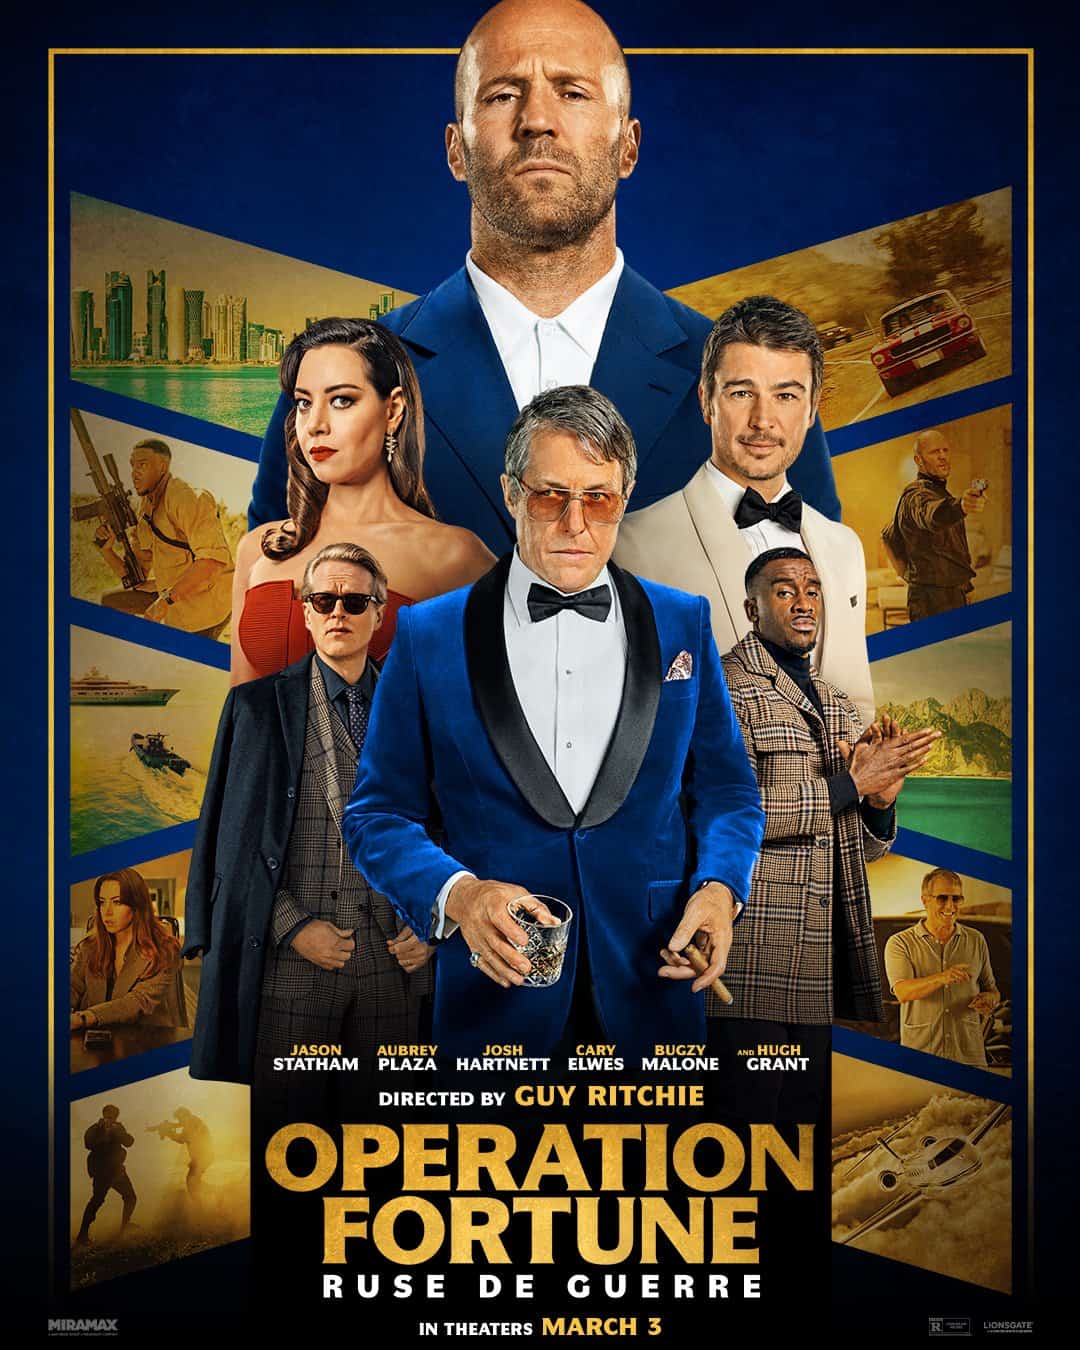 Movie Poster for Operation Fortune Ruse de guerre